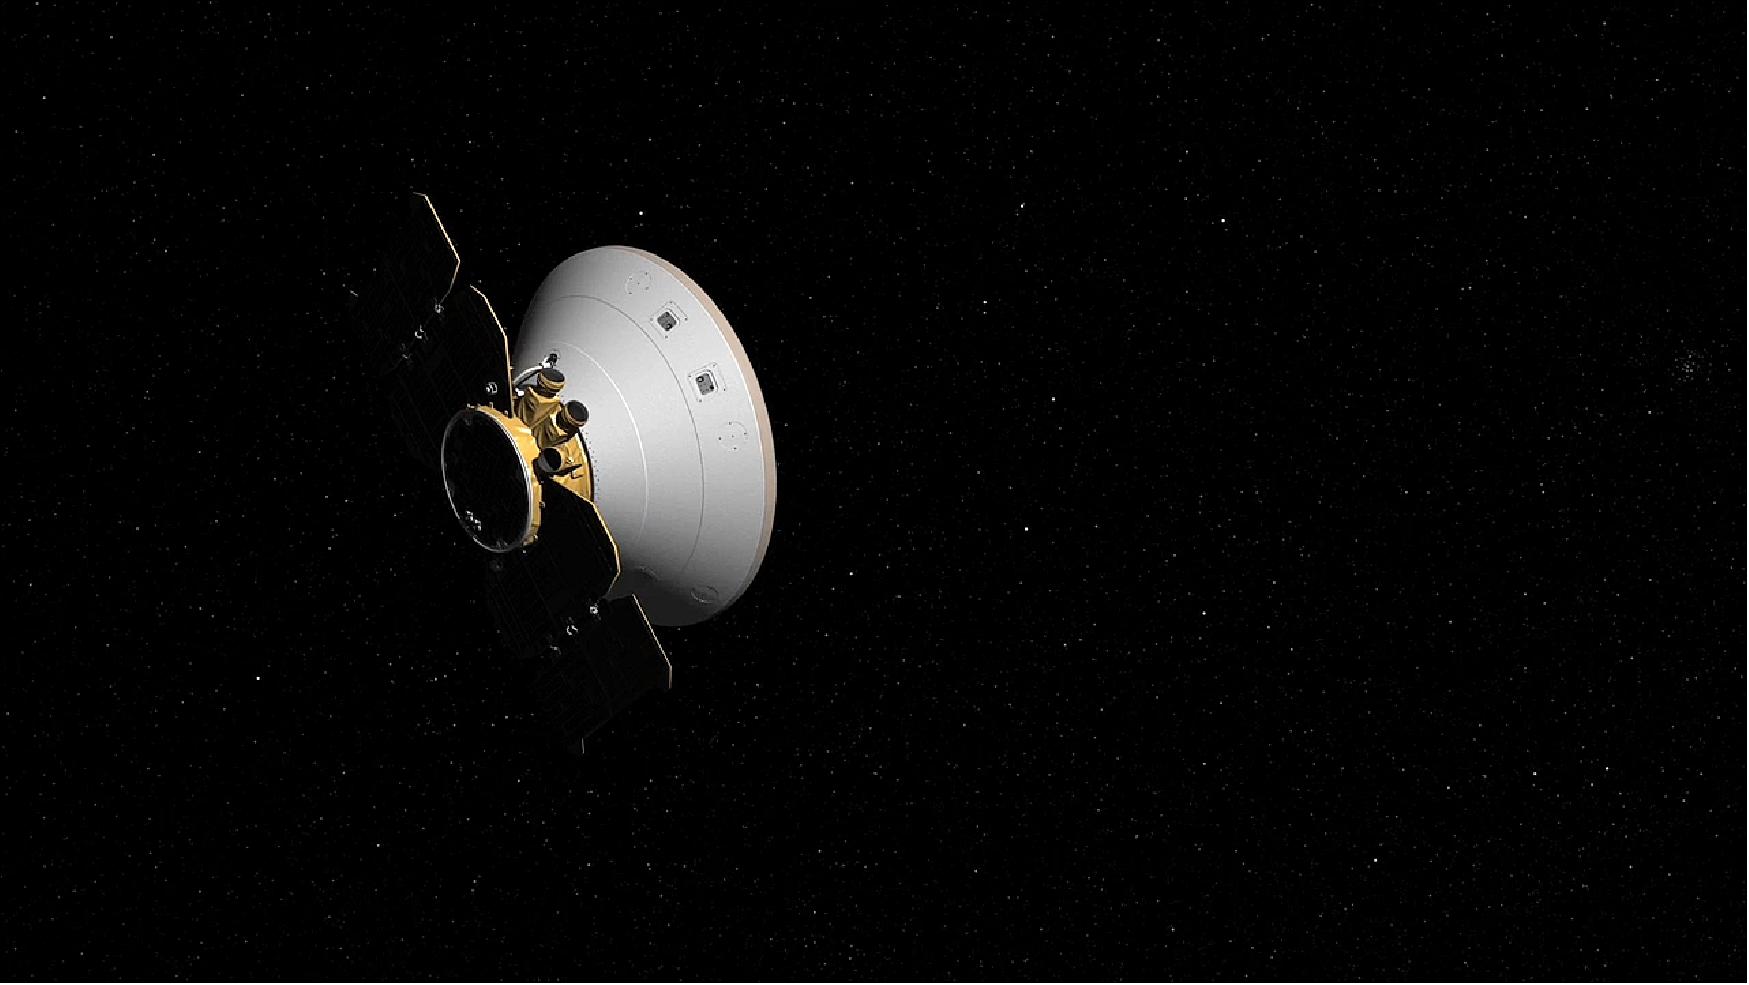 Figure 13: Illustration of the InSight spacecraft with deployed solar panels during the cruise phase (image credit: NASA)